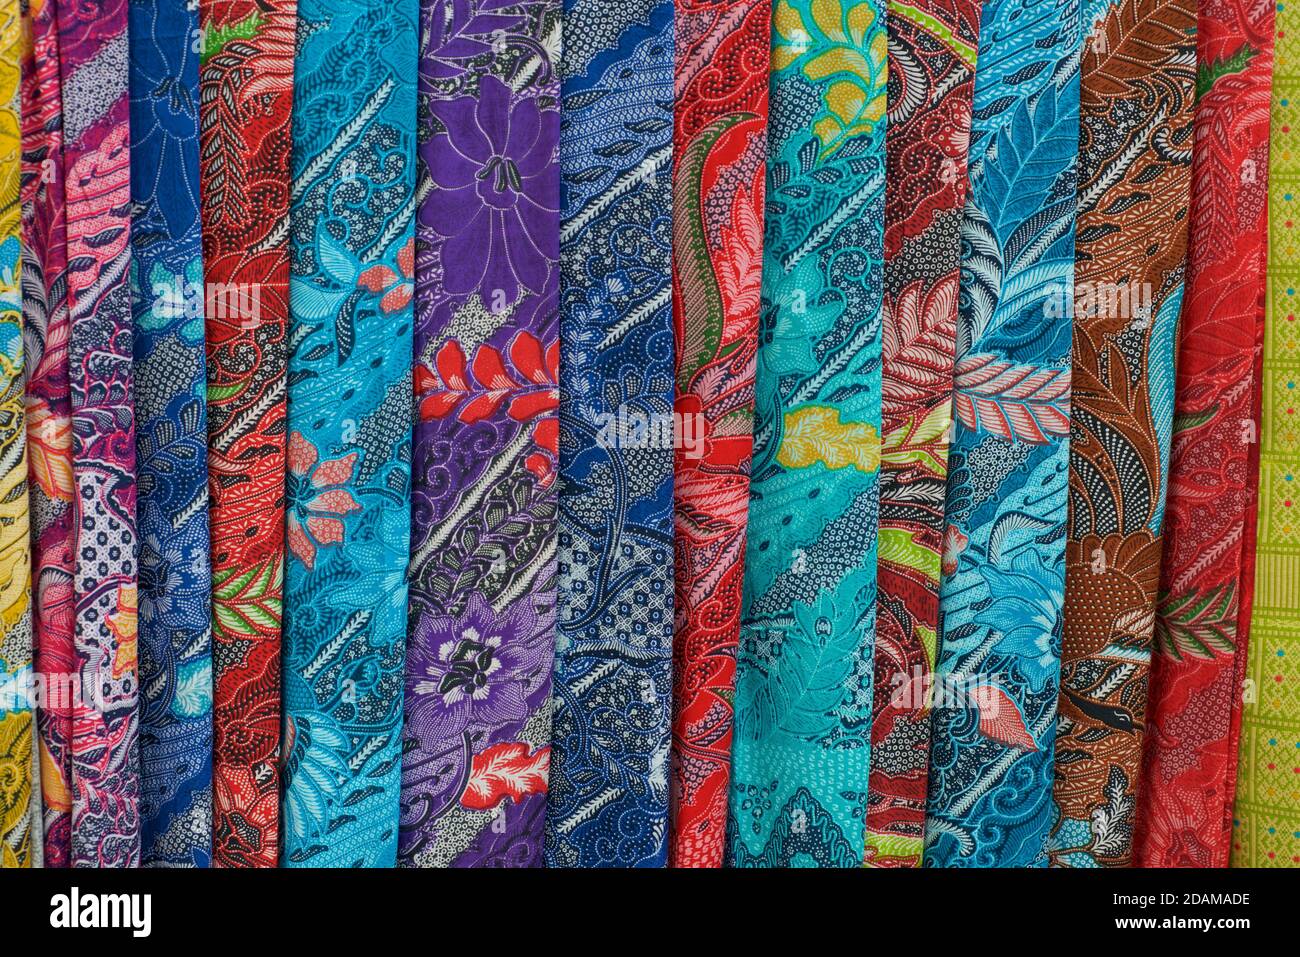 A selection of Balinese fabrics; brightly coloured sarongs for sale on a market stall. Bali. Indonesia Stock Photo